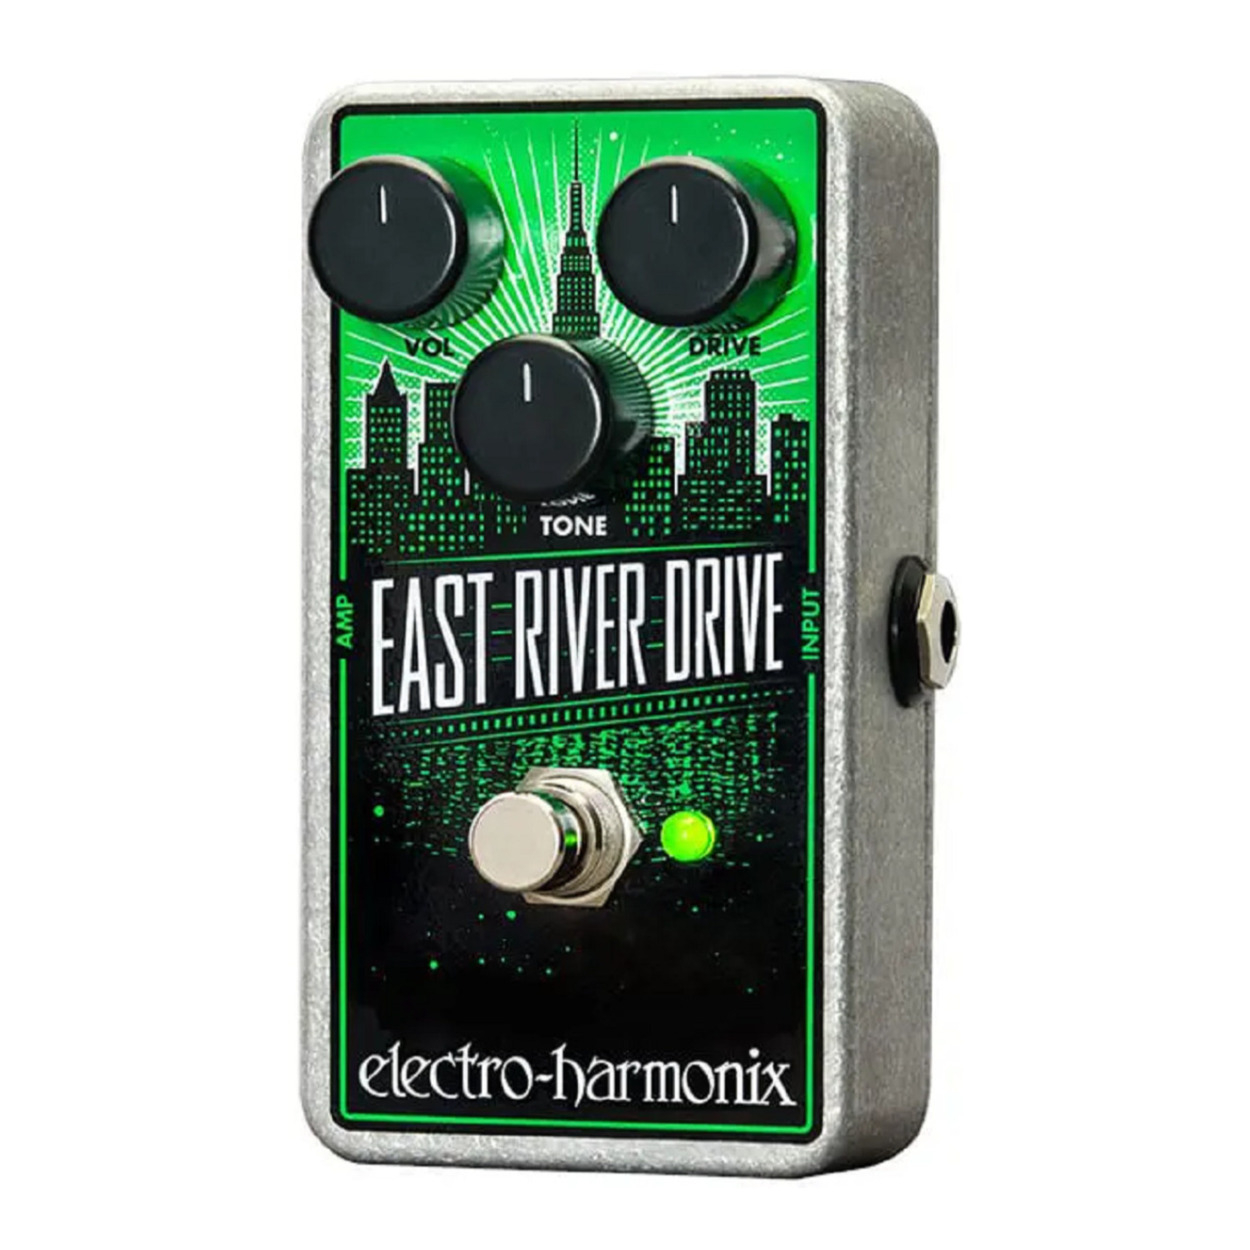 Drive Classic Overdrive Pedal in Green - Electro-Harmonix EAST RIVER